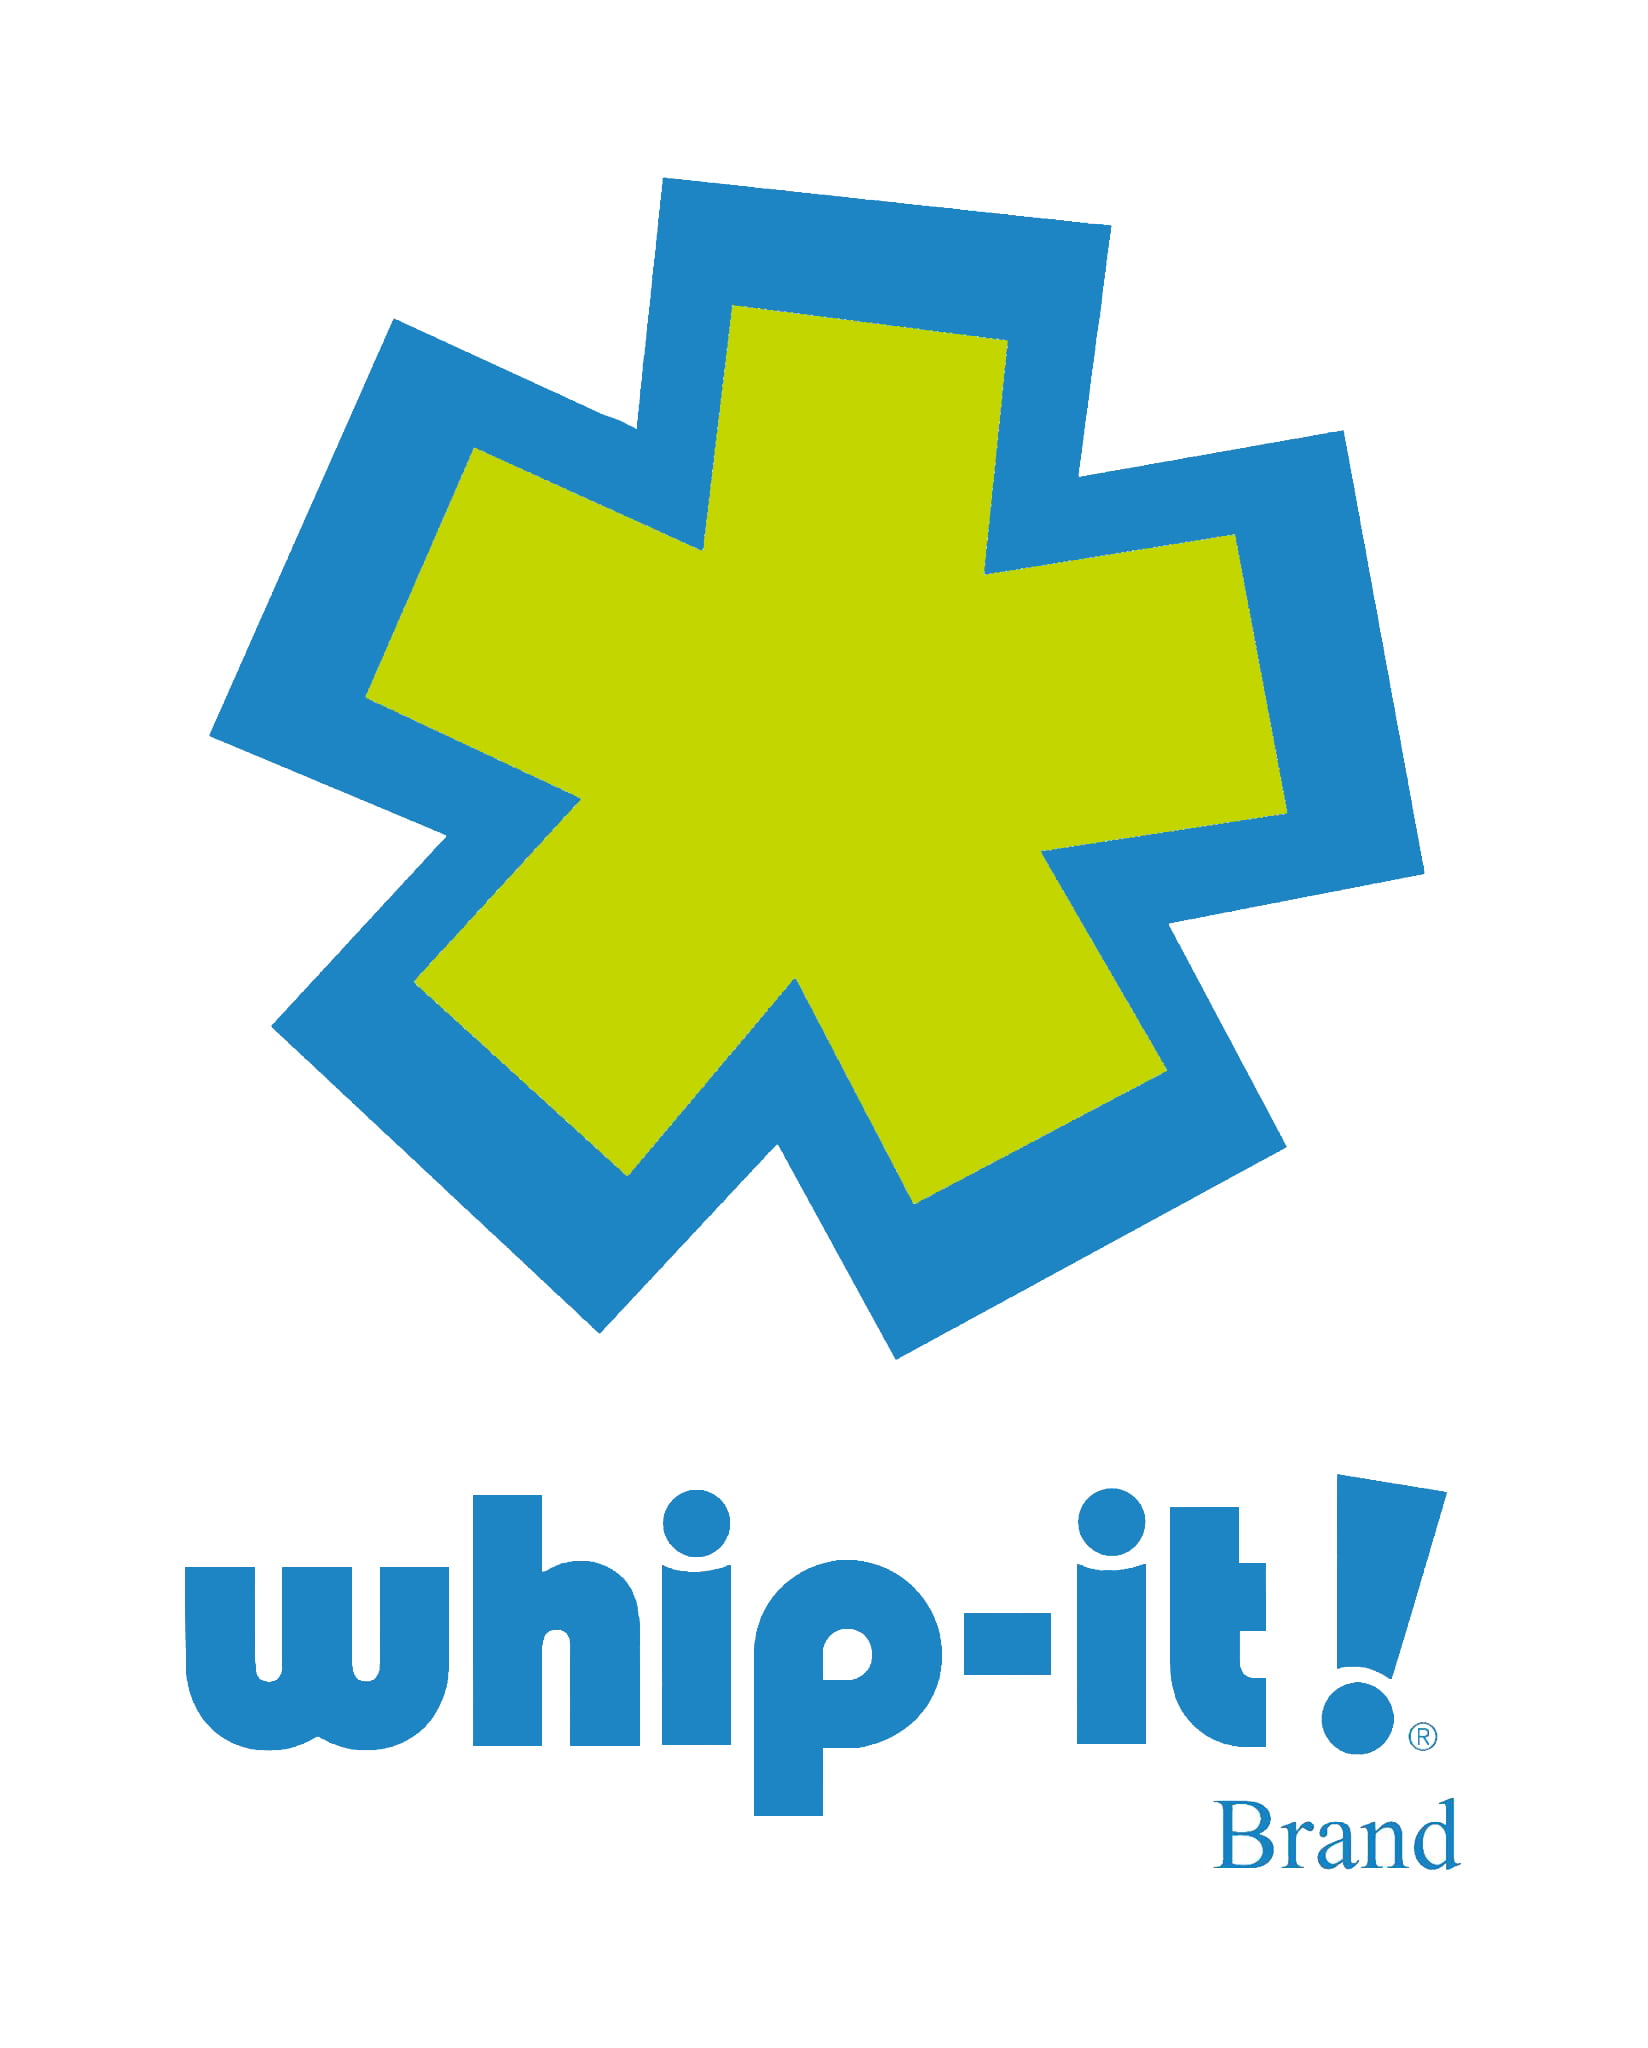 whip-it!